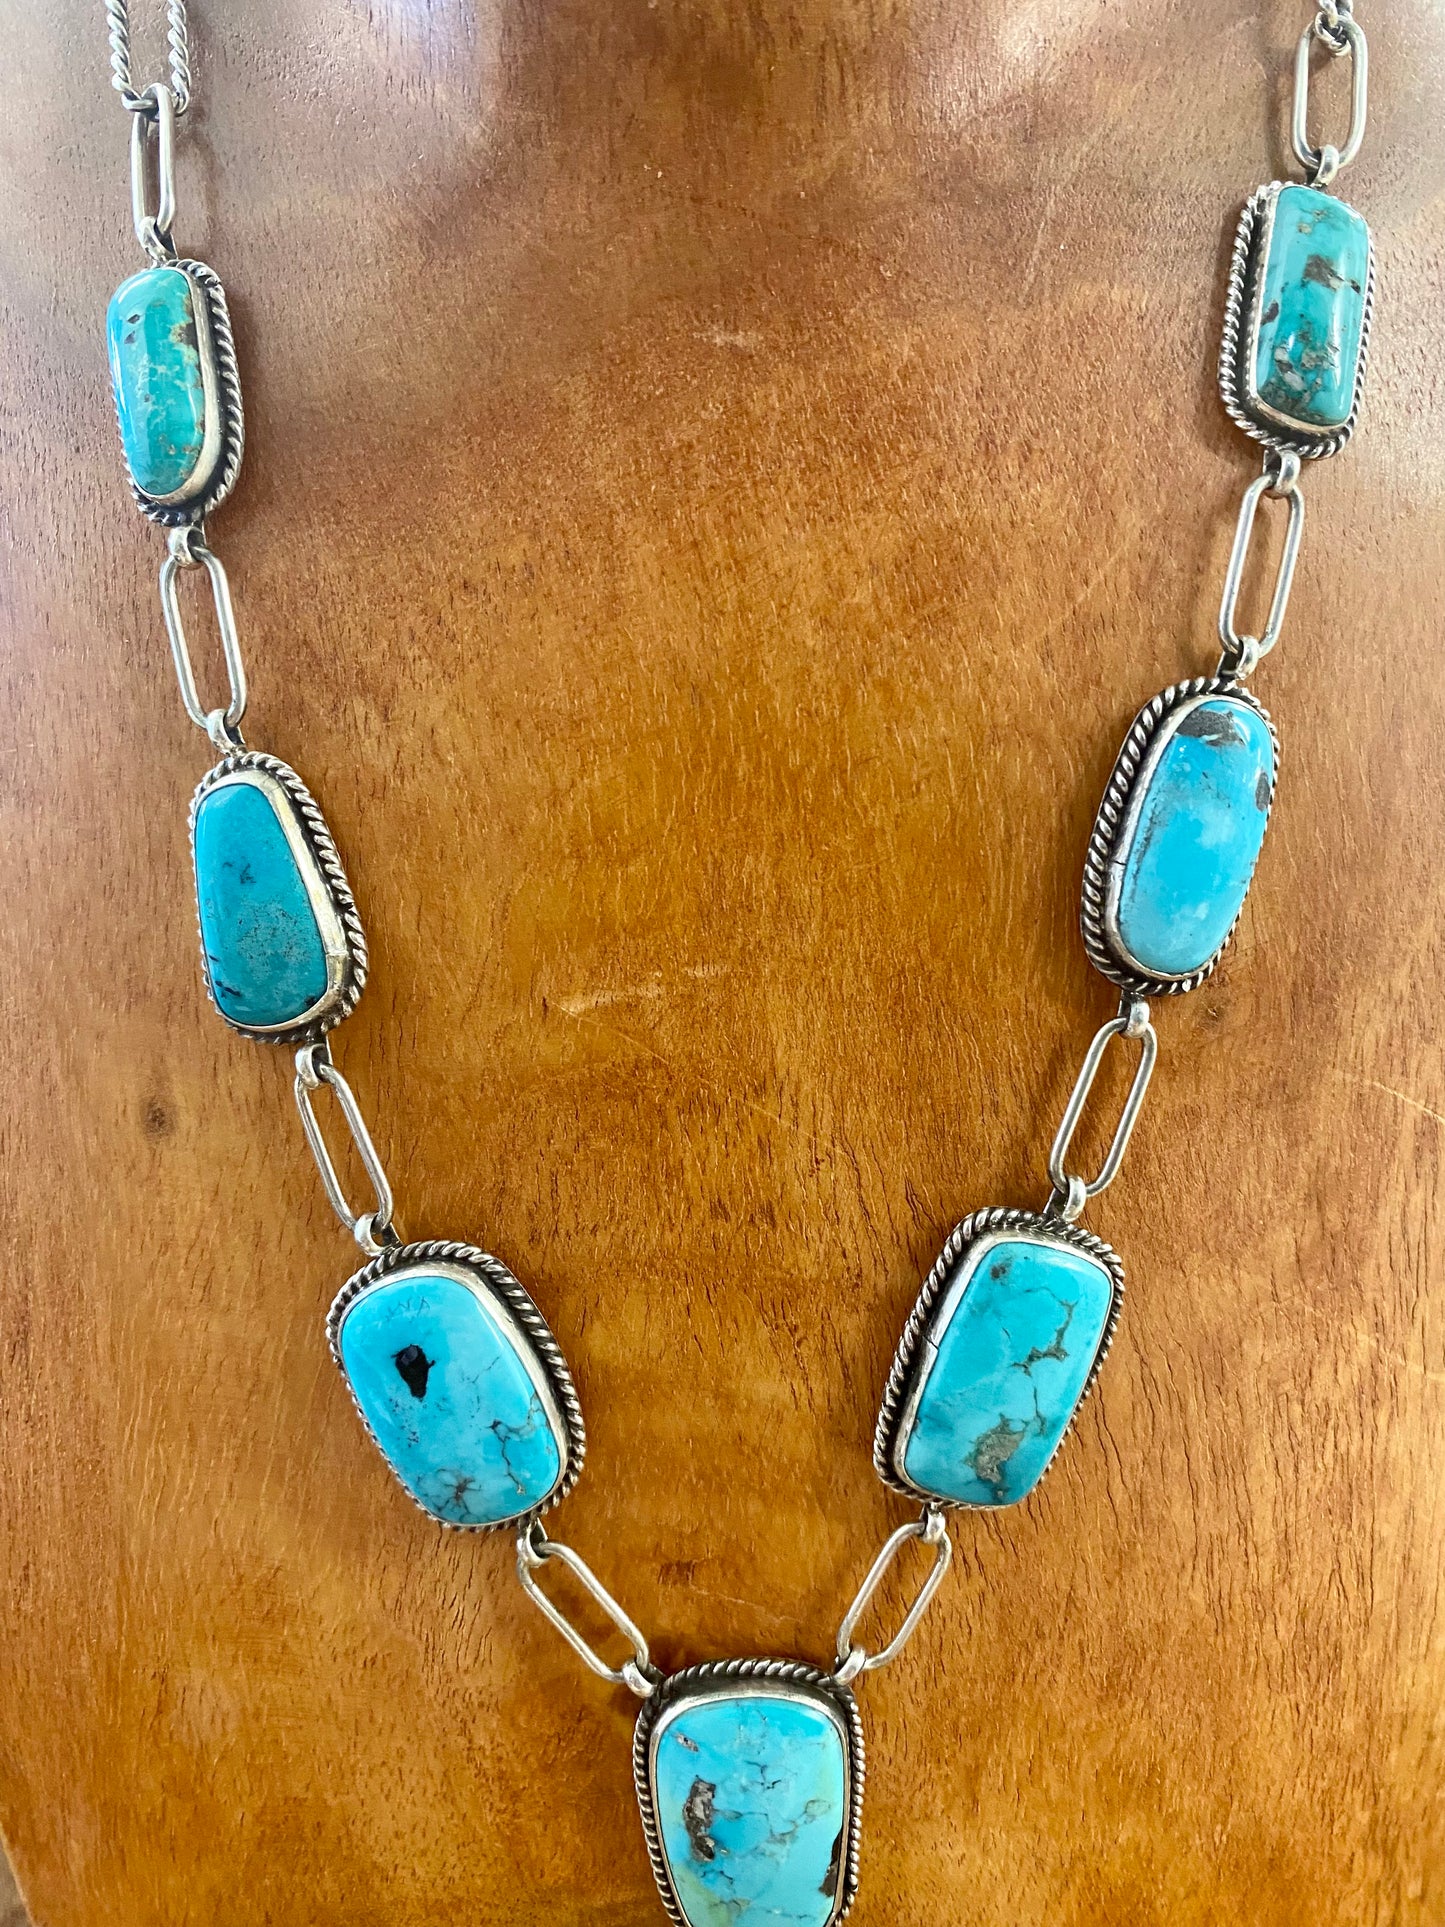 Stunning Morenci turquoise lariat style sterling silver Native American-made statement 31" inches length necklace. The perfect necklace to gift to your loved one or keep for your own jewelry collection! This piece is stamped sterling and signed "K" by the talented Native artist Karlene Goodluck.   Size: 31” inches in length   Stone: Morenci Turquoise  Signed: YES "K"  Artist / Hallmark: Karlene Goodluck